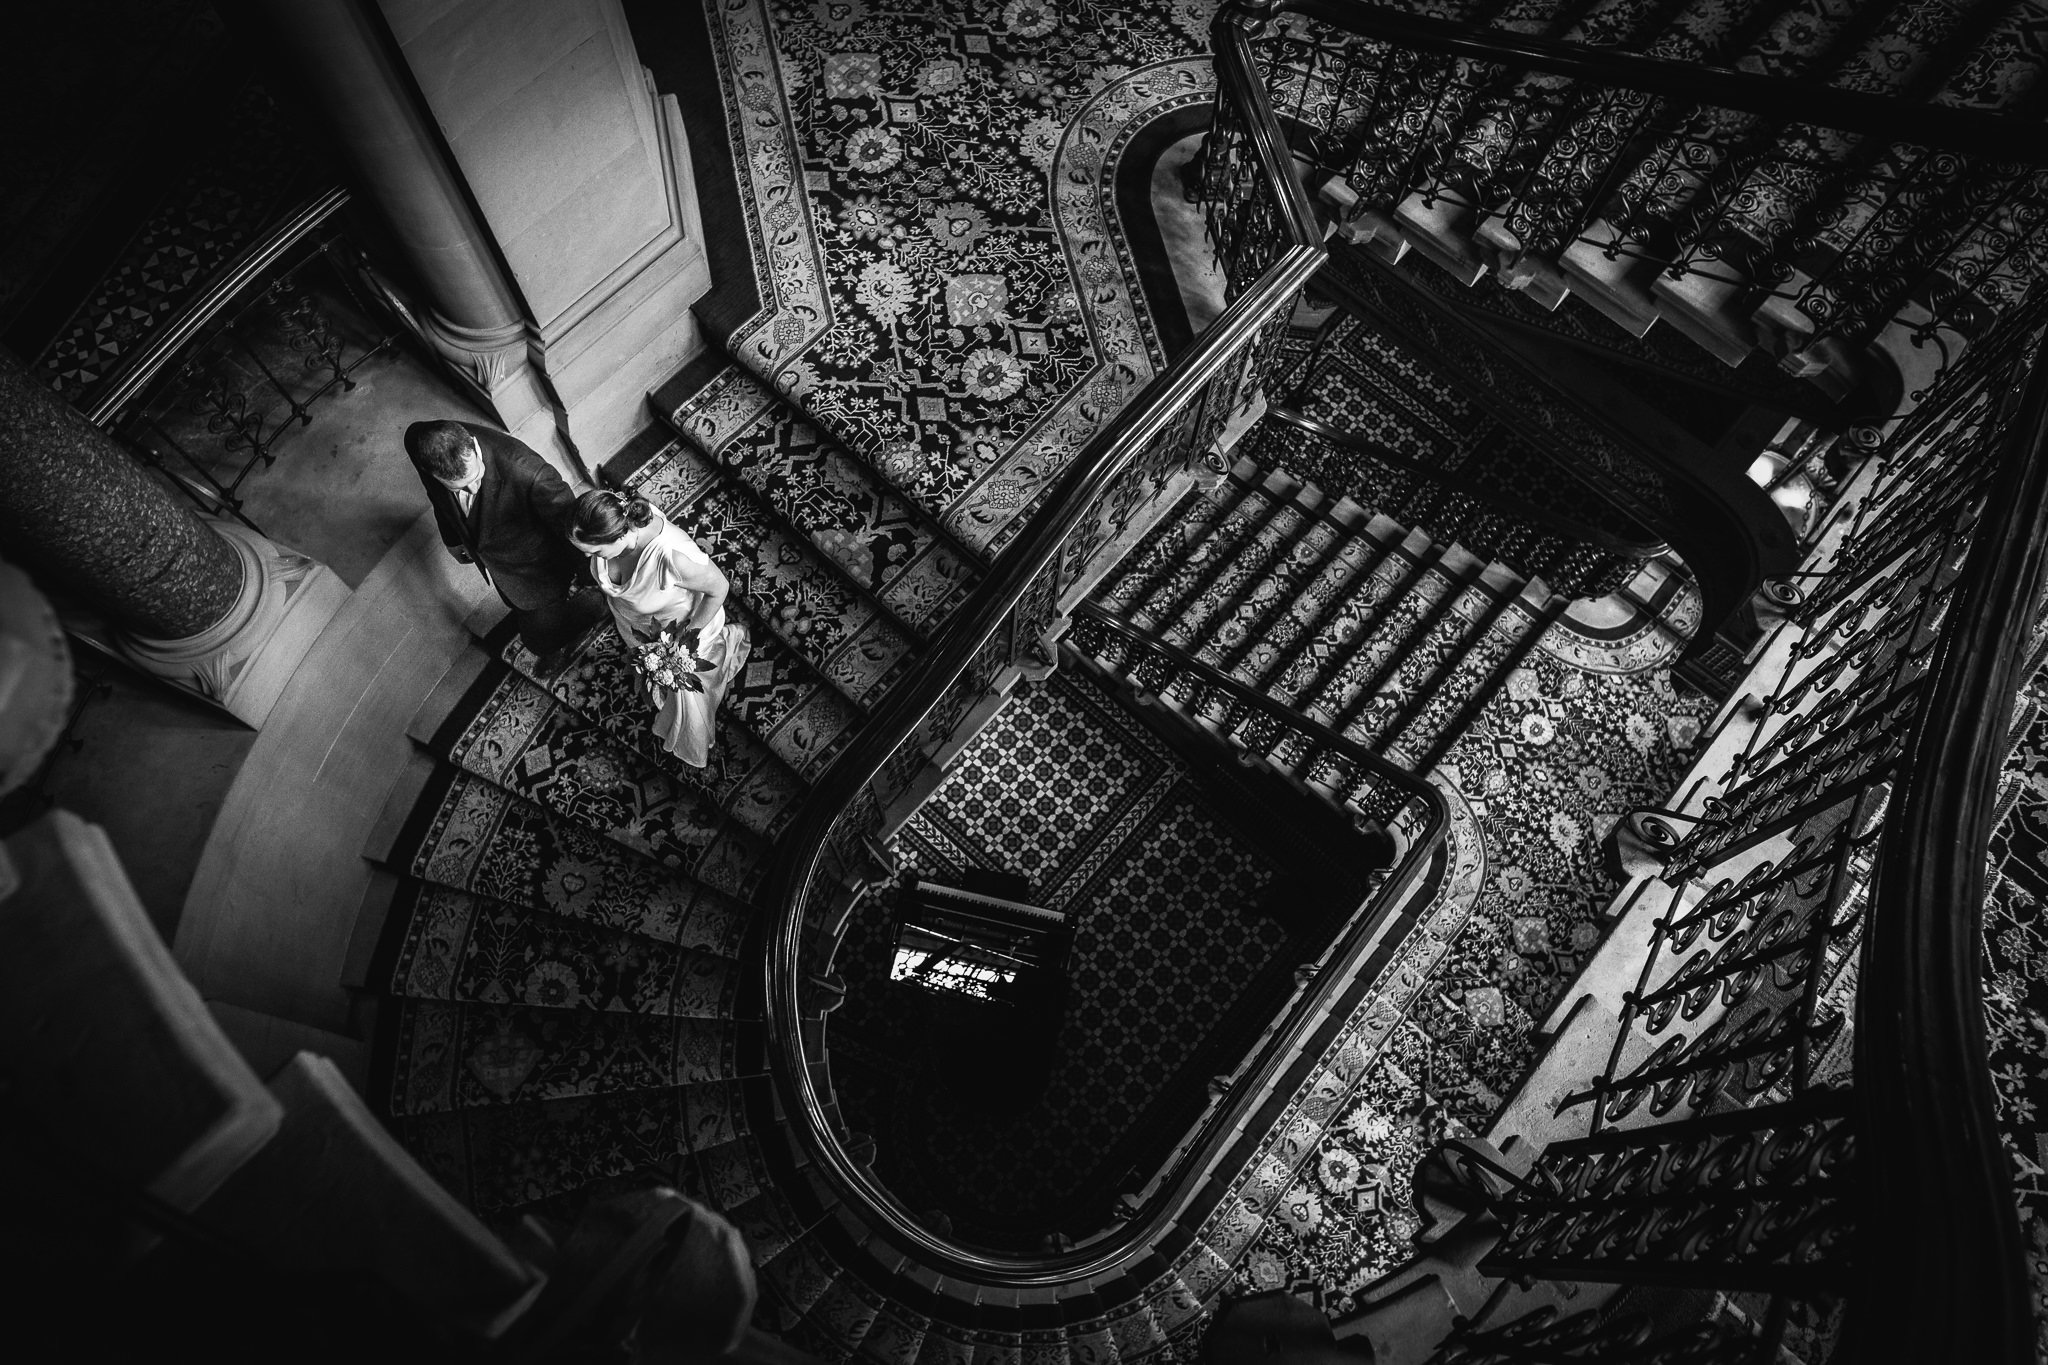  Bride and Groom as seen from above descending a beautiful staircase at St. Pancras Renaissance Hotel London 